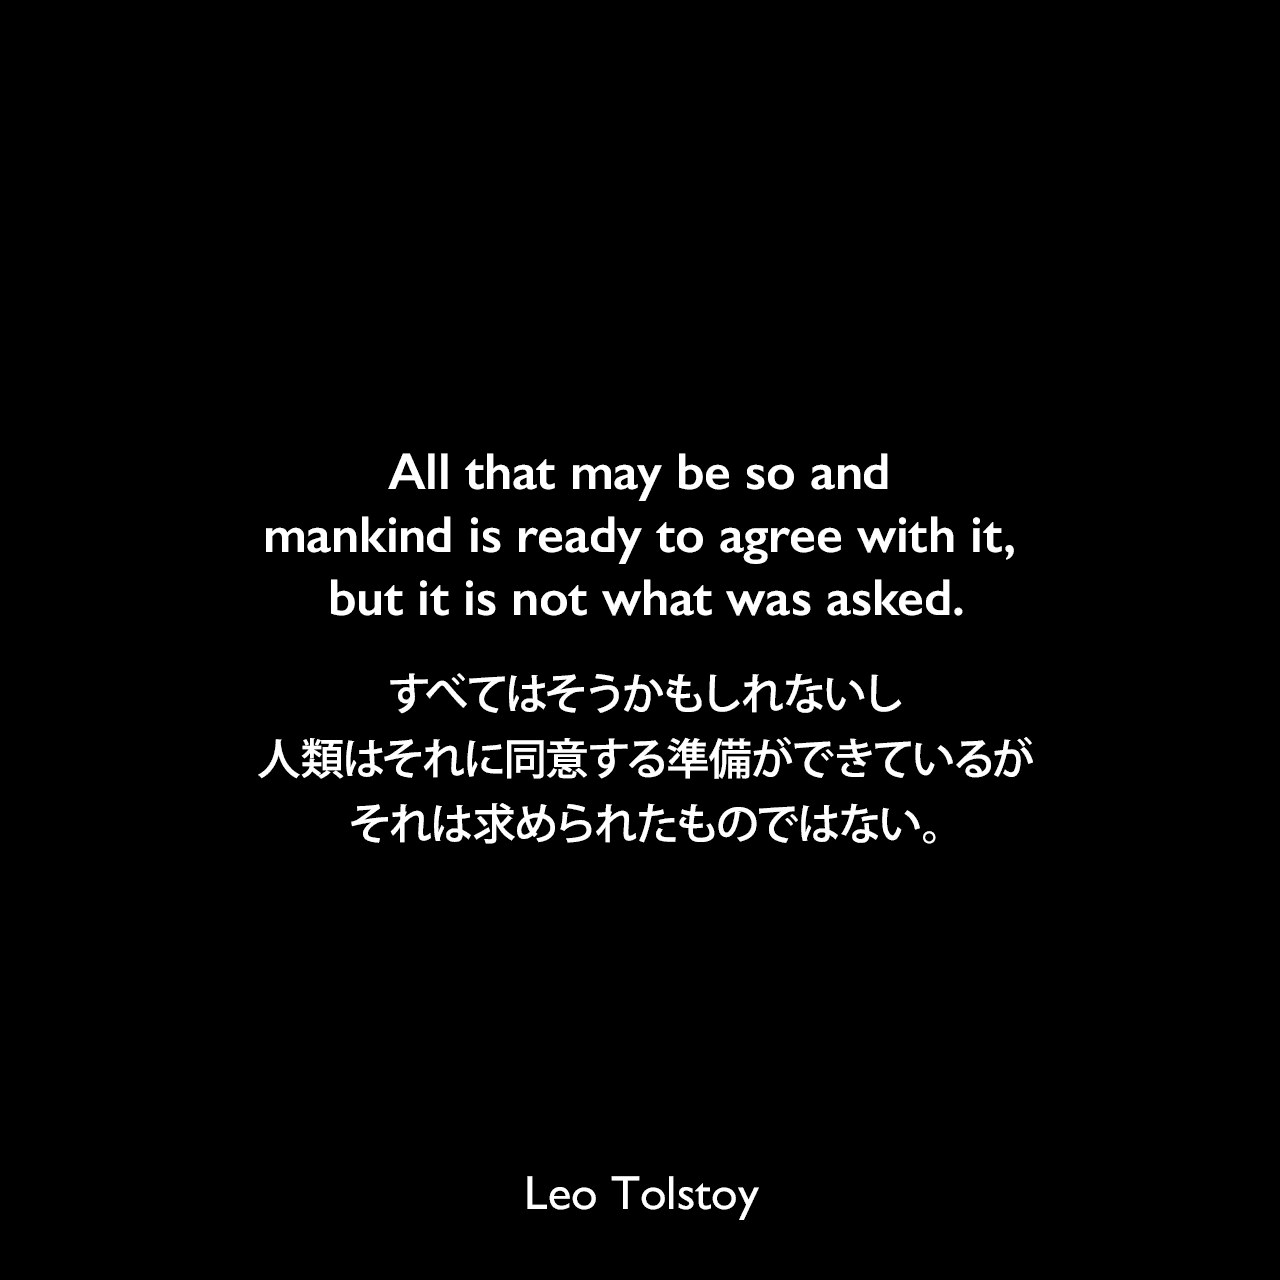 All that may be so and mankind is ready to agree with it, but it is not what was asked.すべてはそうかもしれないし、人類はそれに同意する準備ができているが、それは求められたものではない。- トルストイによる小説「戦争と平和」よりLeo Tolstoy